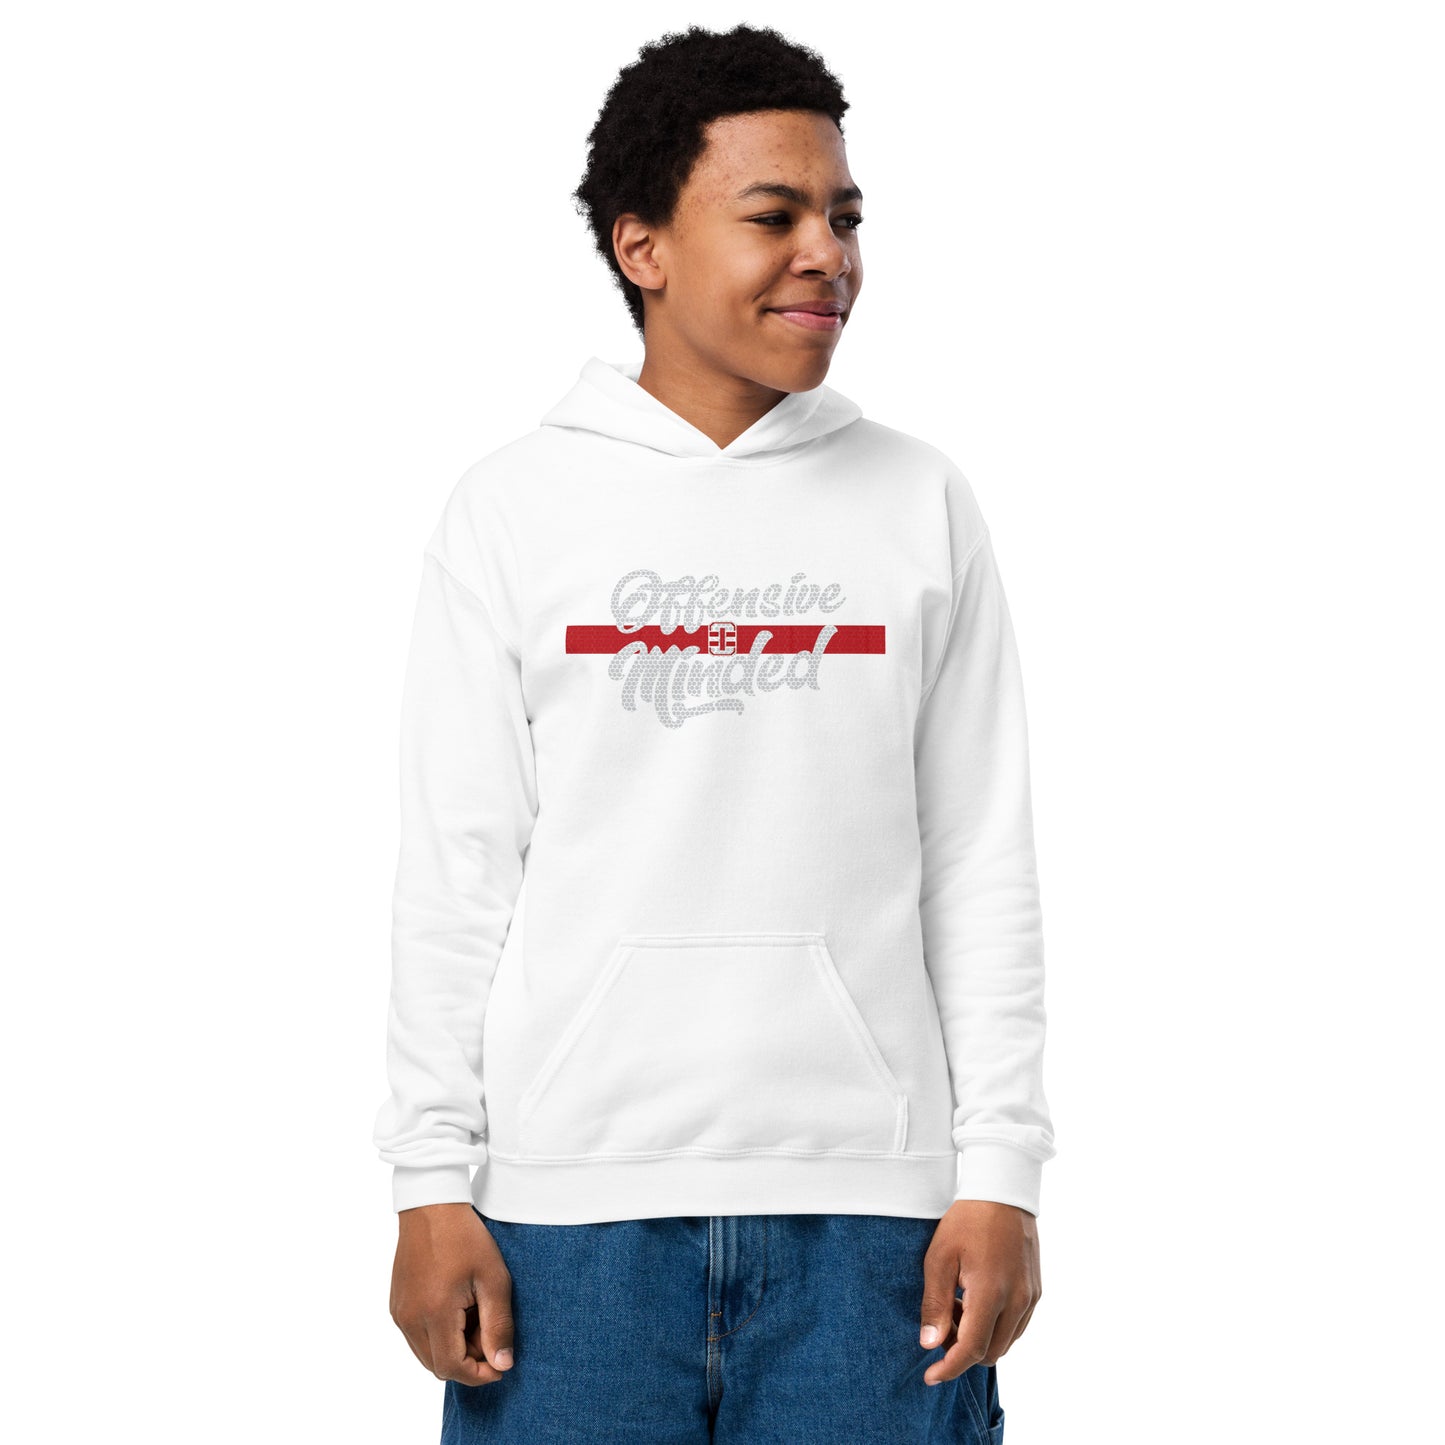 Offensive Script Youth heavy blend hoodie